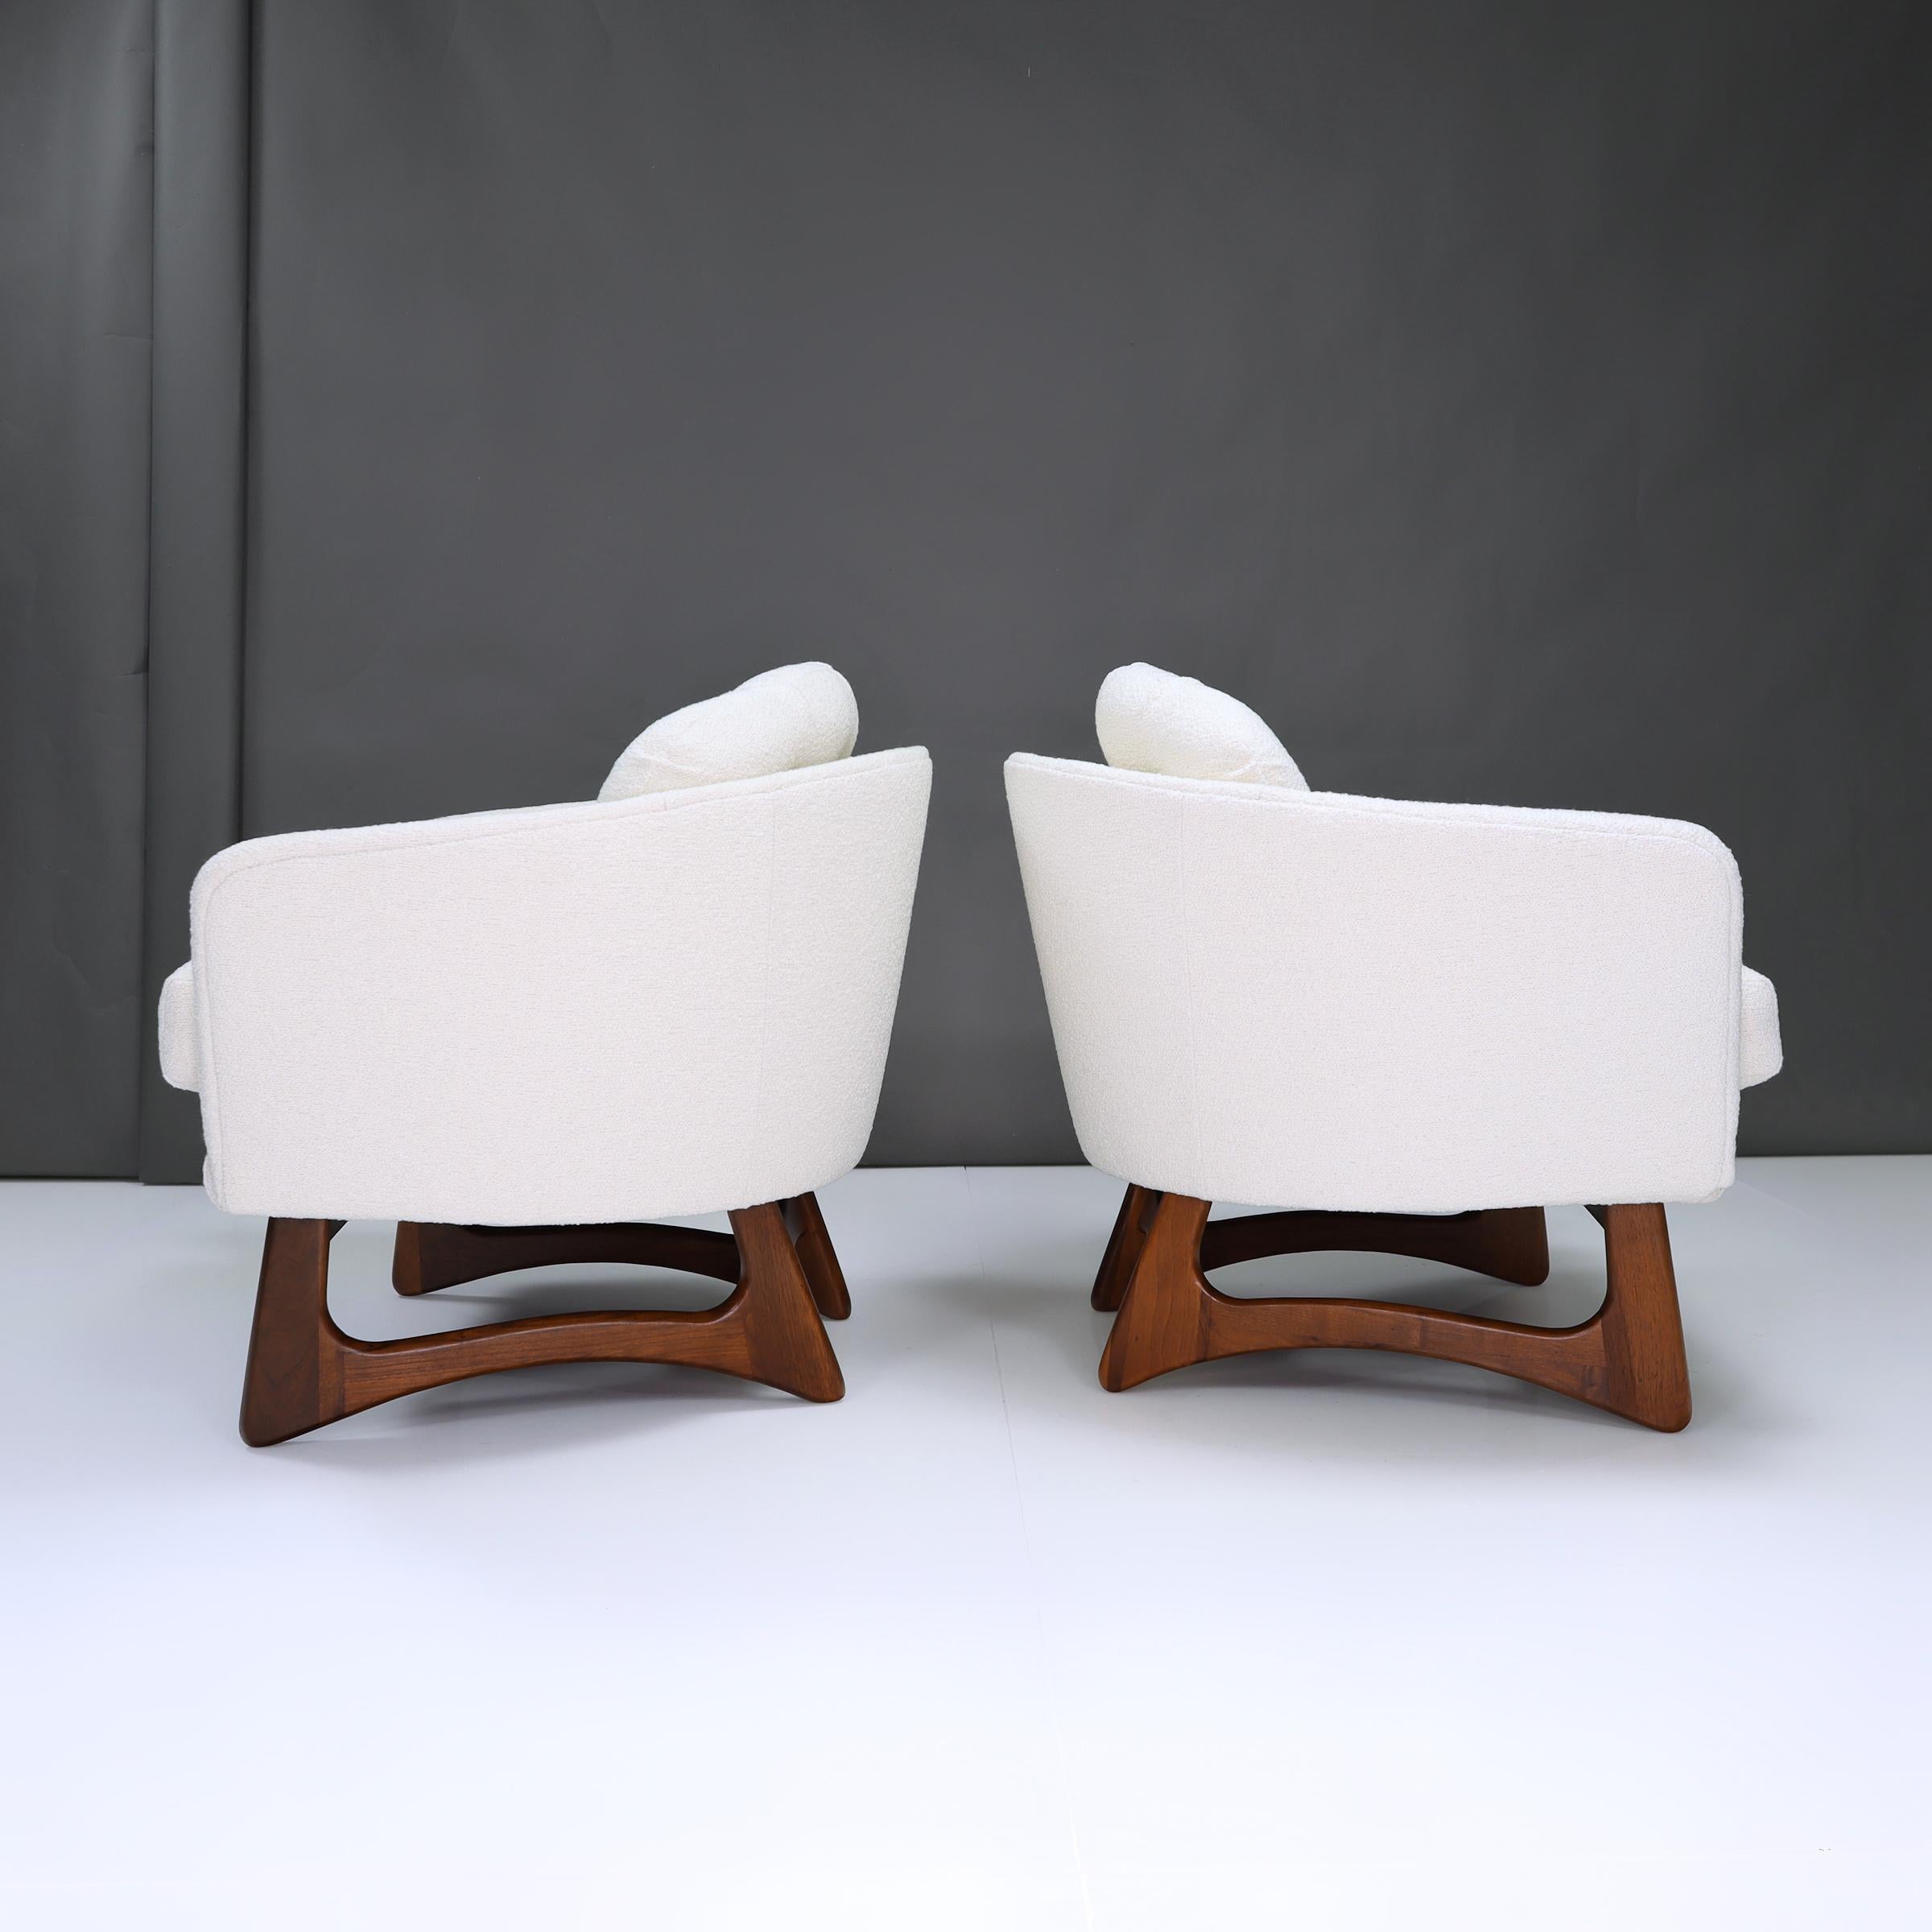 Step into the pinnacle of modern comfort with these Adrian Pearsall Barrel Back Lounge chairs, where relaxation meets style seamlessly.

These exquisite pieces offer a haven akin to lounging in a sleek, contemporary cloud, delivering unparalleled